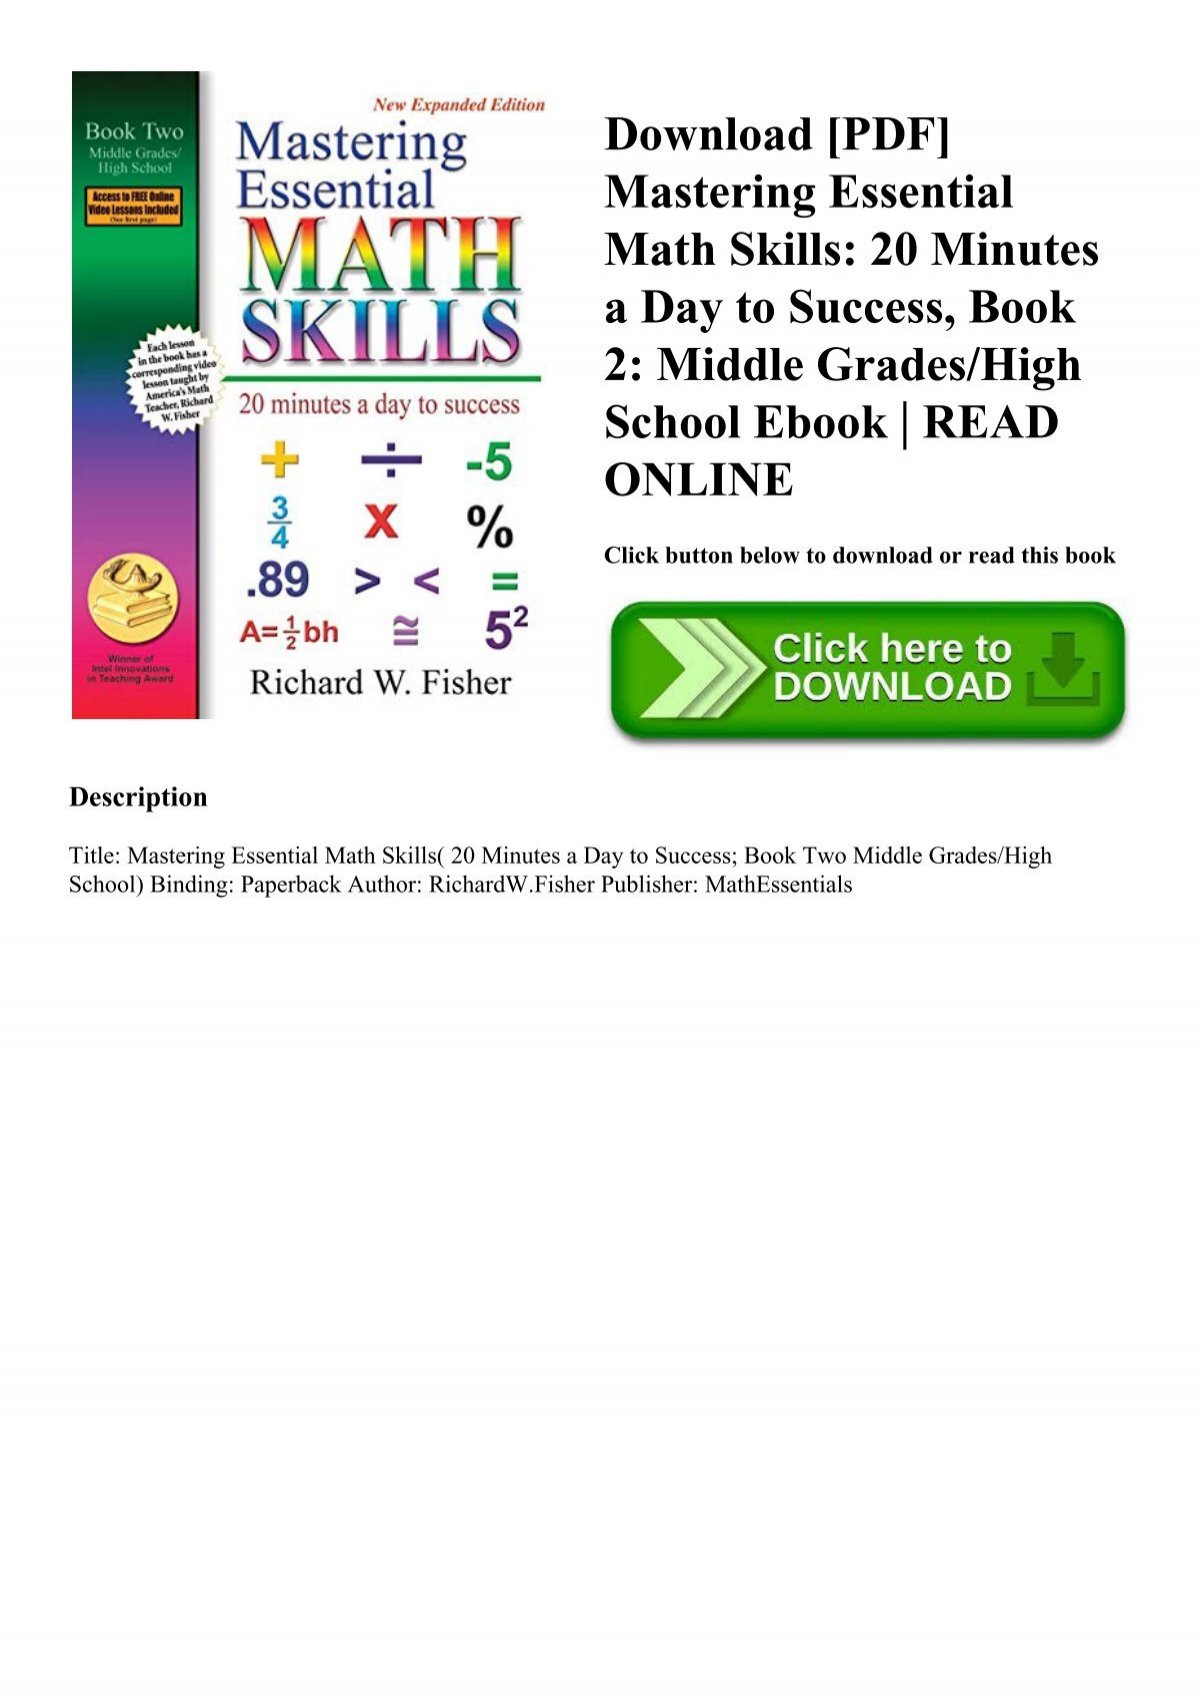 download-pdf-mastering-essential-math-skills-20-minutes-a-day-to-success-book-2-middle